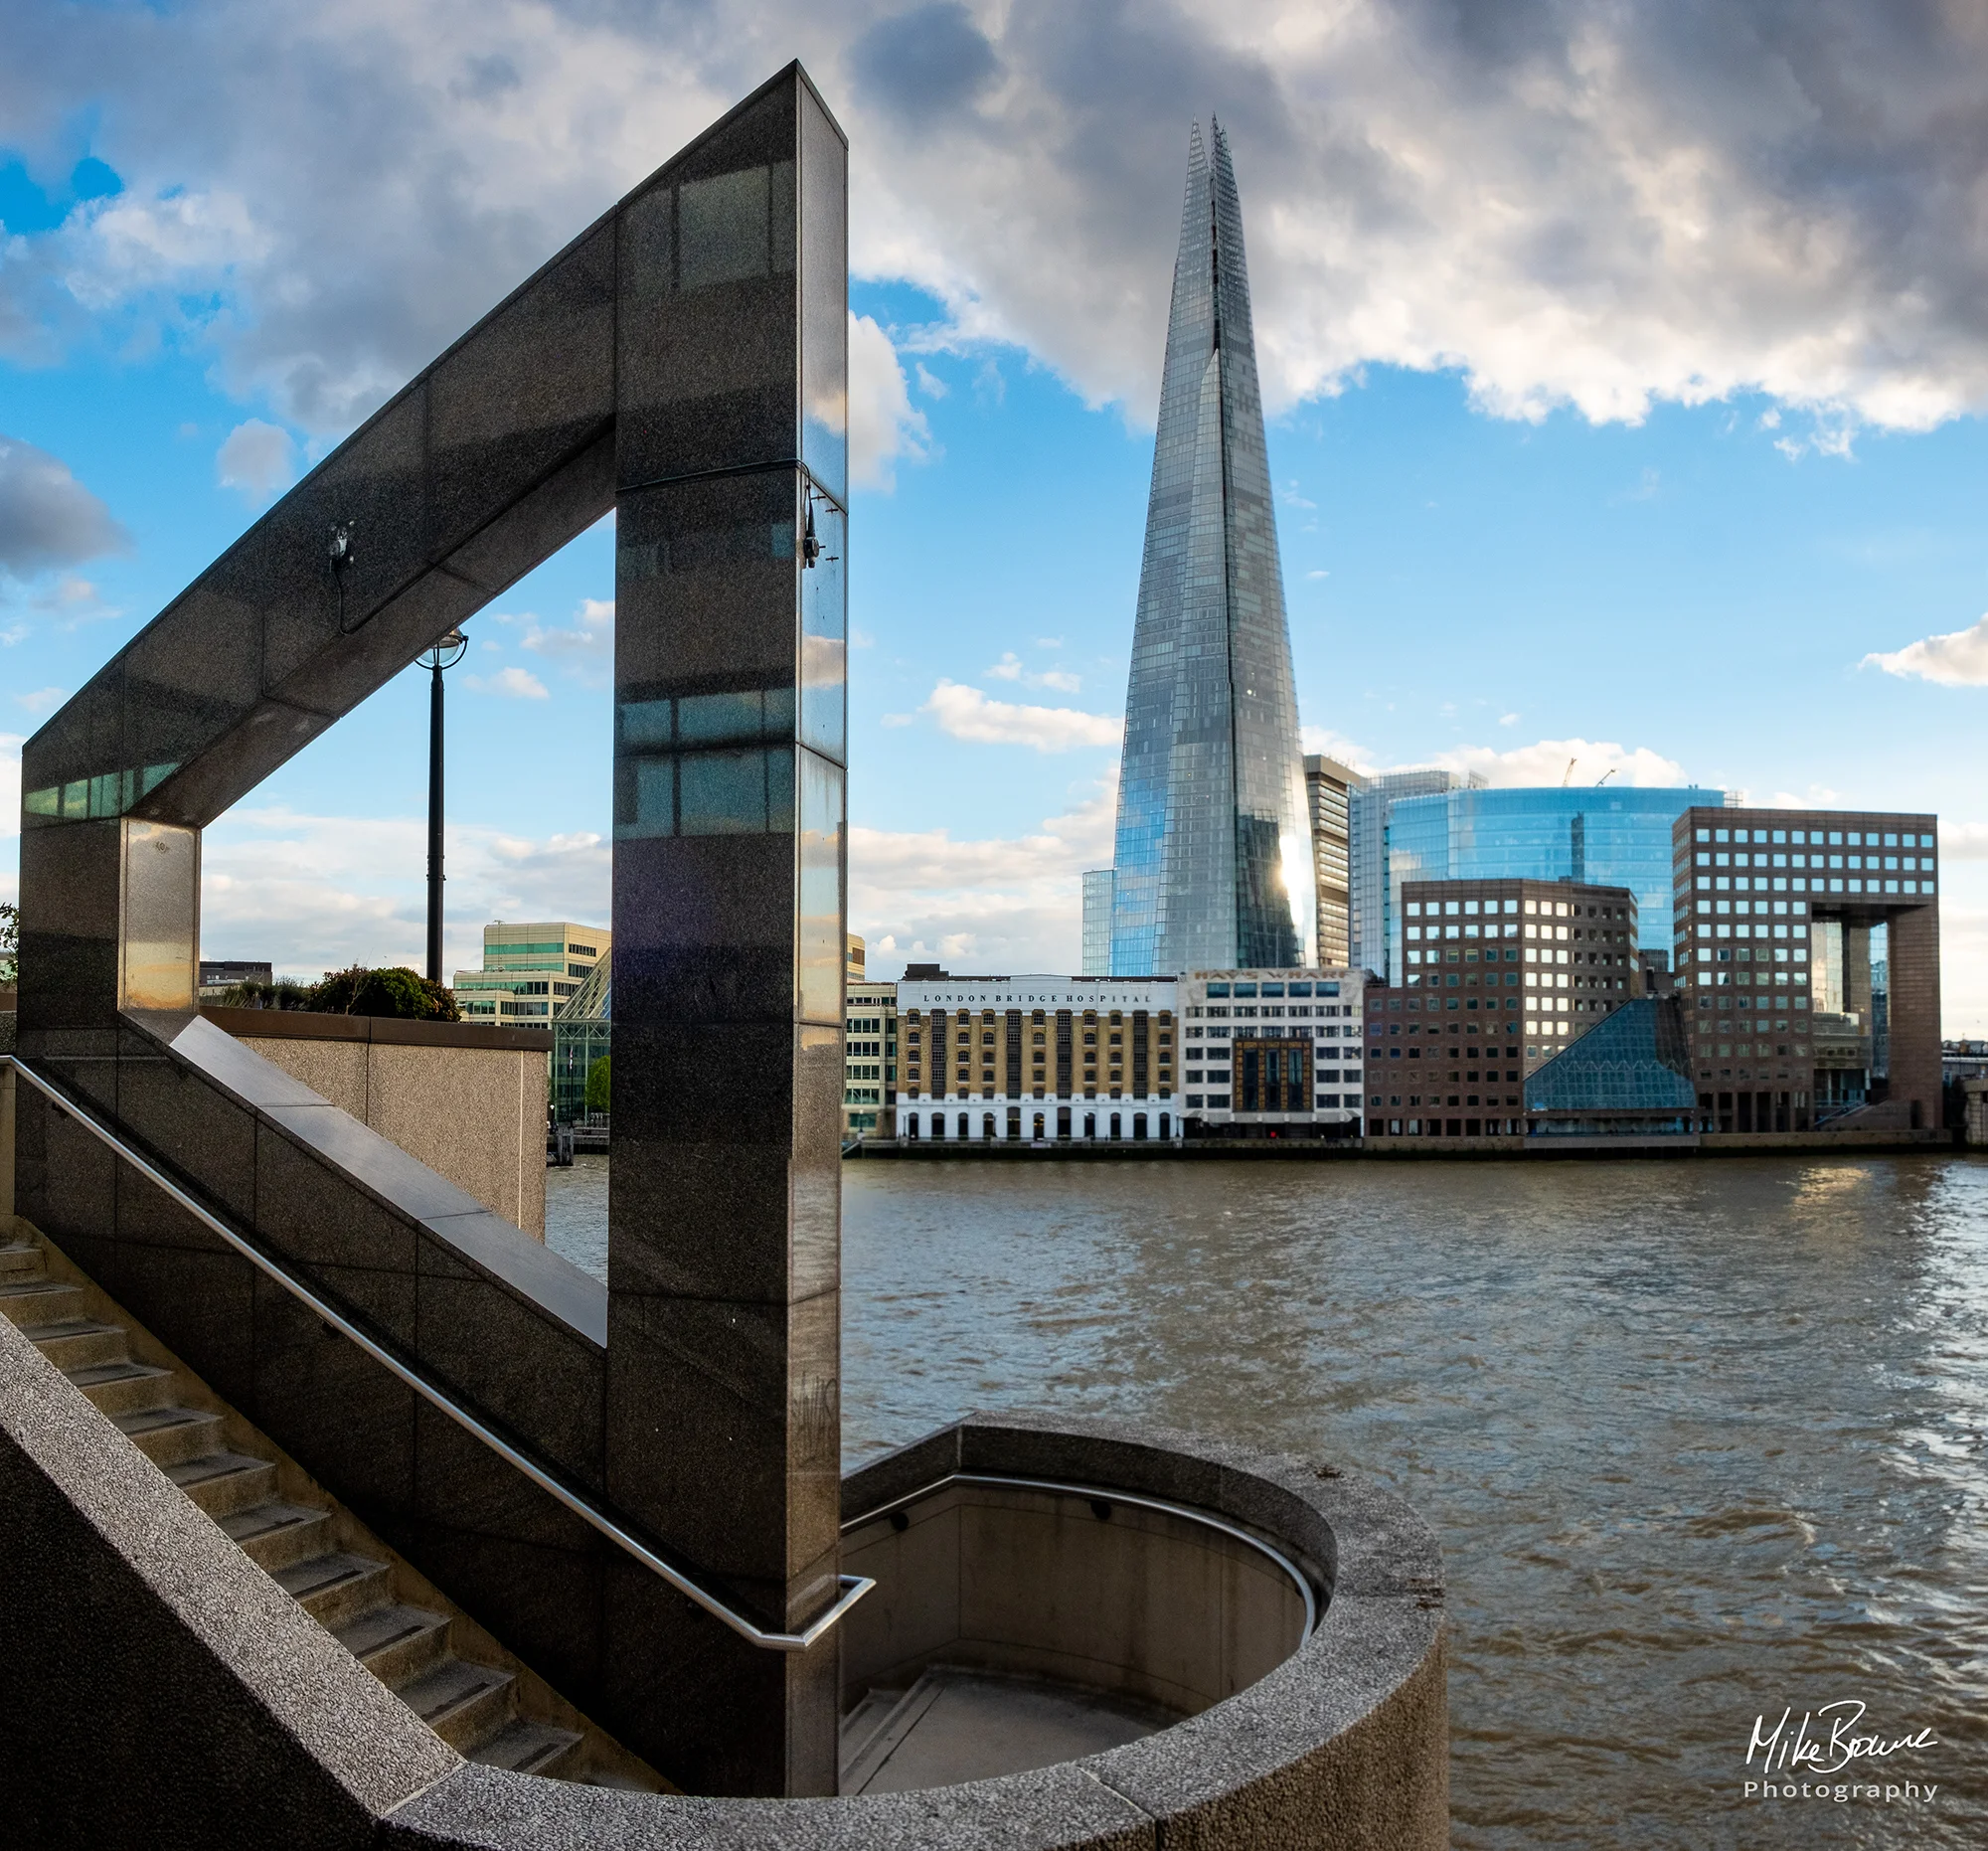 Trapezoid shape on stair rail with The Shard in the background across The Thames